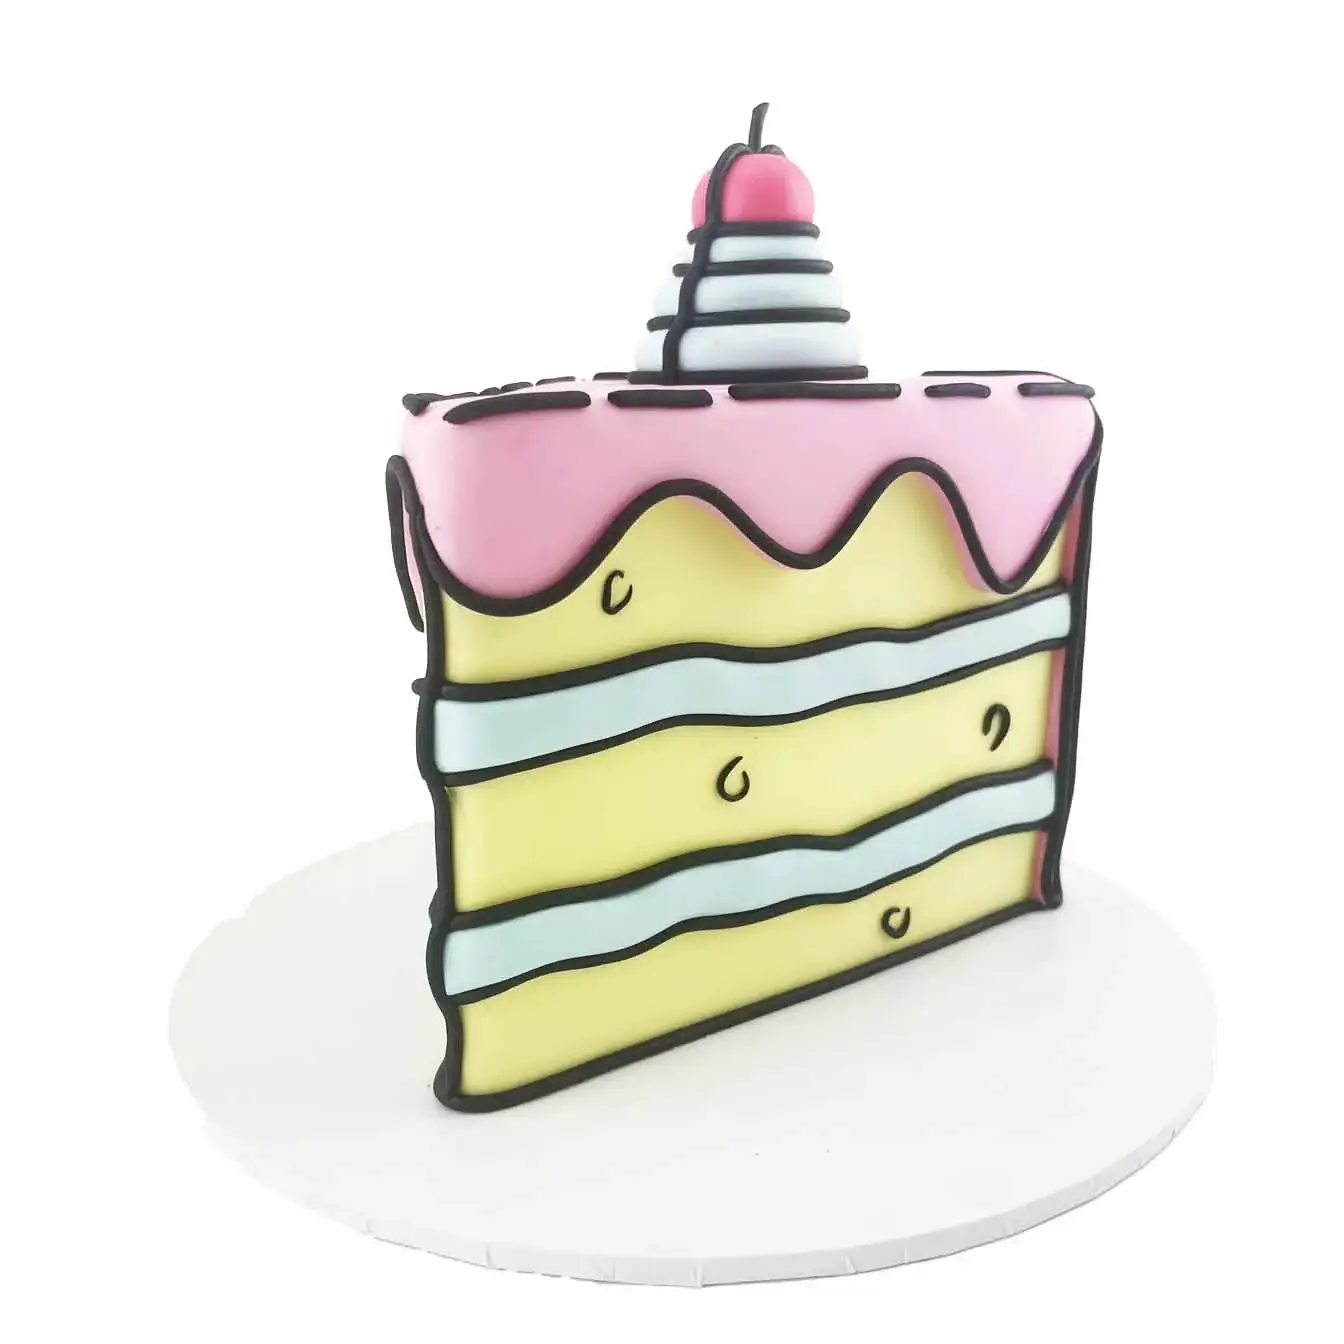 Cartoon-style cake with pink, yellow, and blue layers, decorated with a fun and playful design.